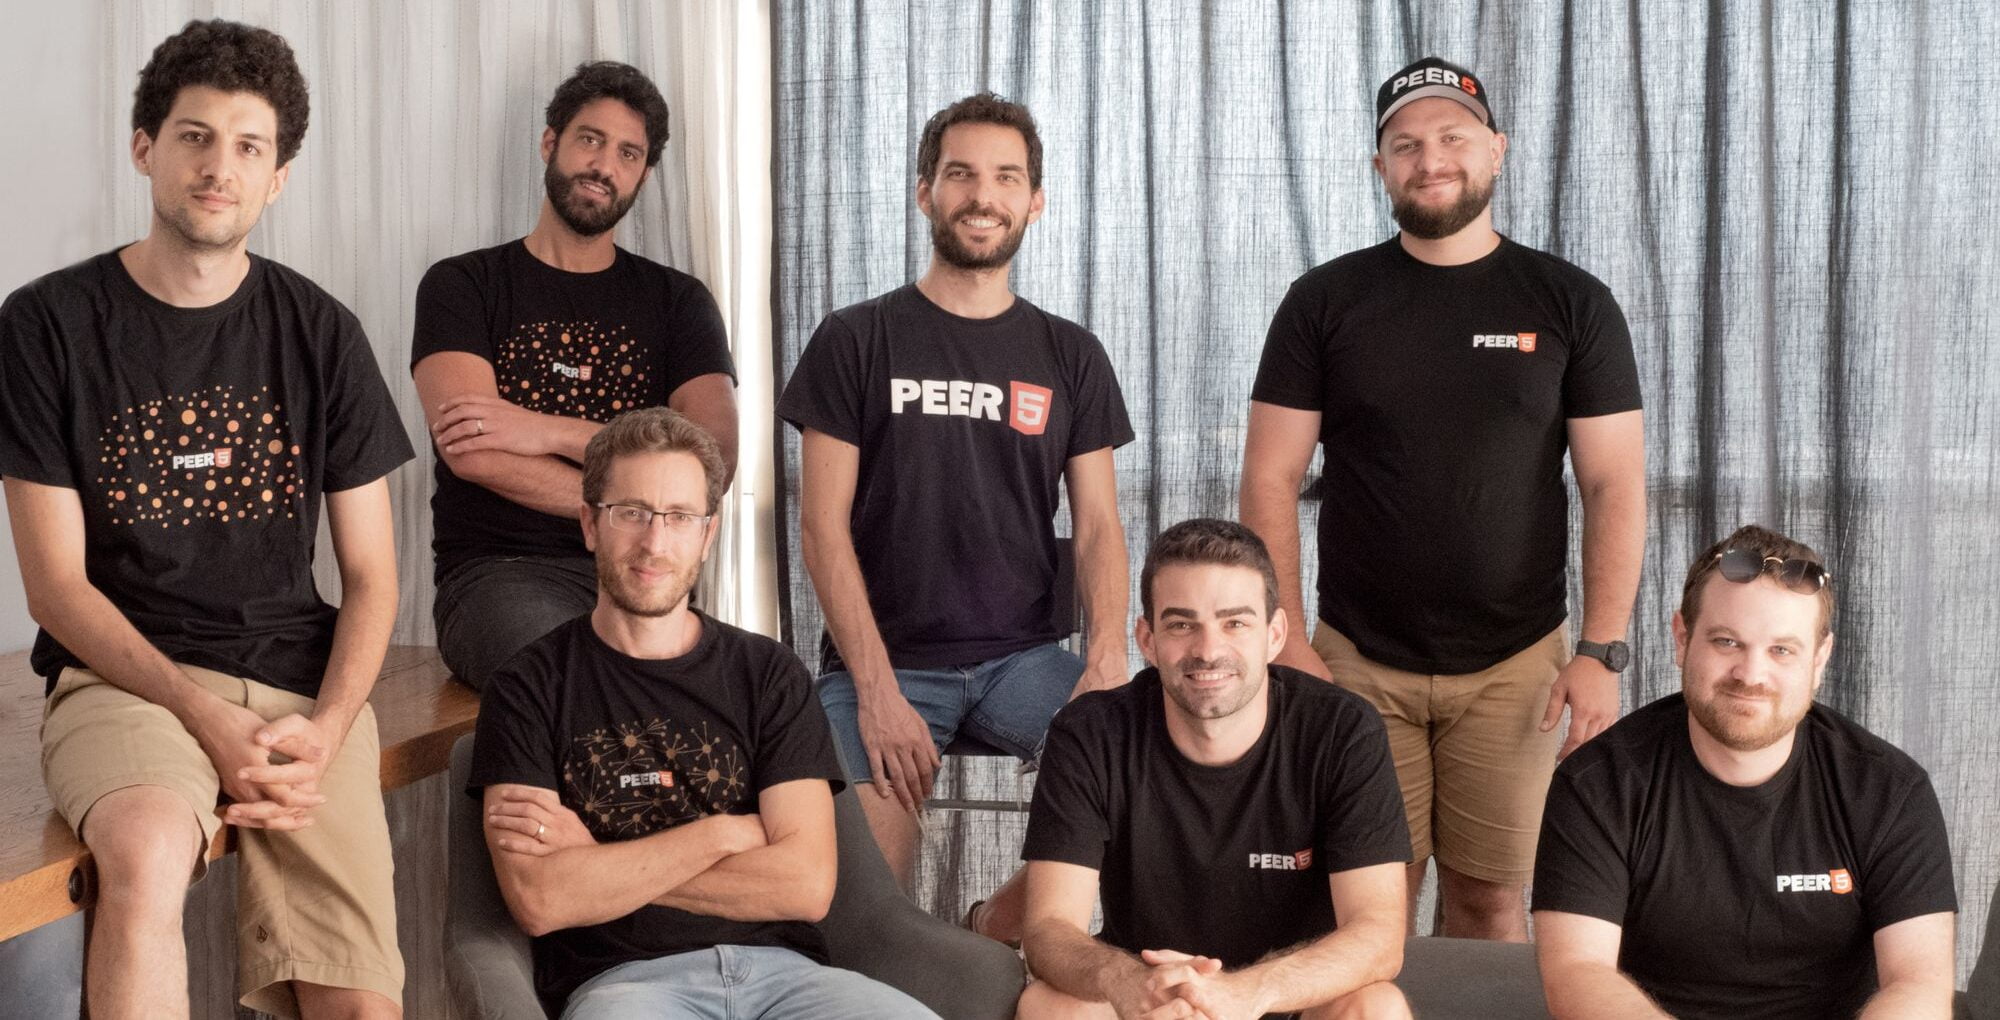 Microsoft acquires Israeli-founded video tech firm Peer5 to enhance live video